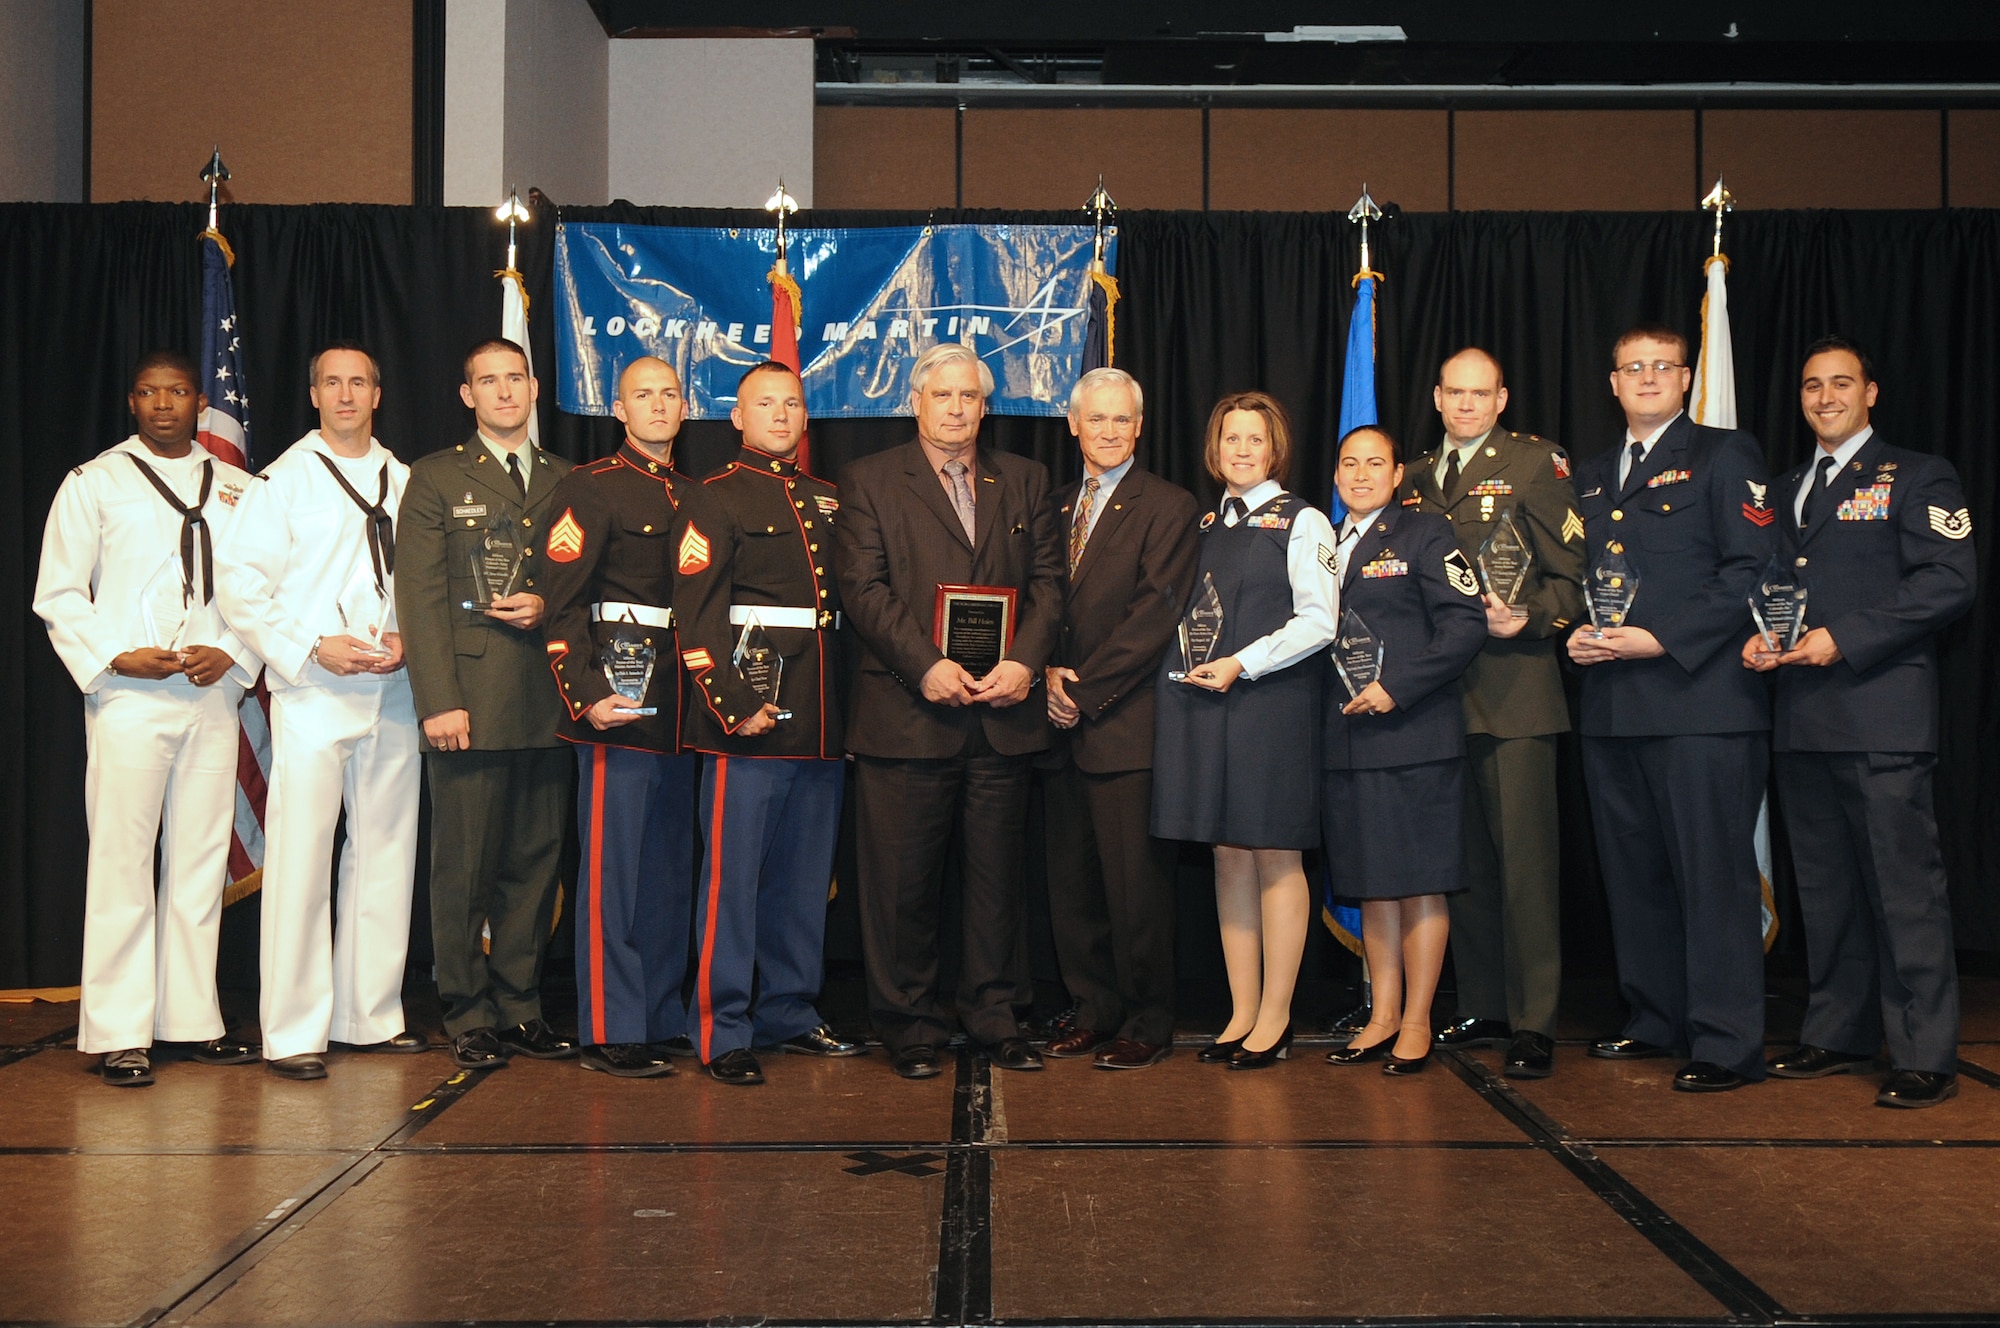 BUCKLEY AIR FORCE BASE, Colo.-- Winners from all United States Military components gather for a group photo at the 37th Annual Armed Forces Recognition Luncheon held at the Crown Plaza hotel, May 14, 2010. (U.S. Air Force Photo by Airman 1st Class Manisha Vasquez)